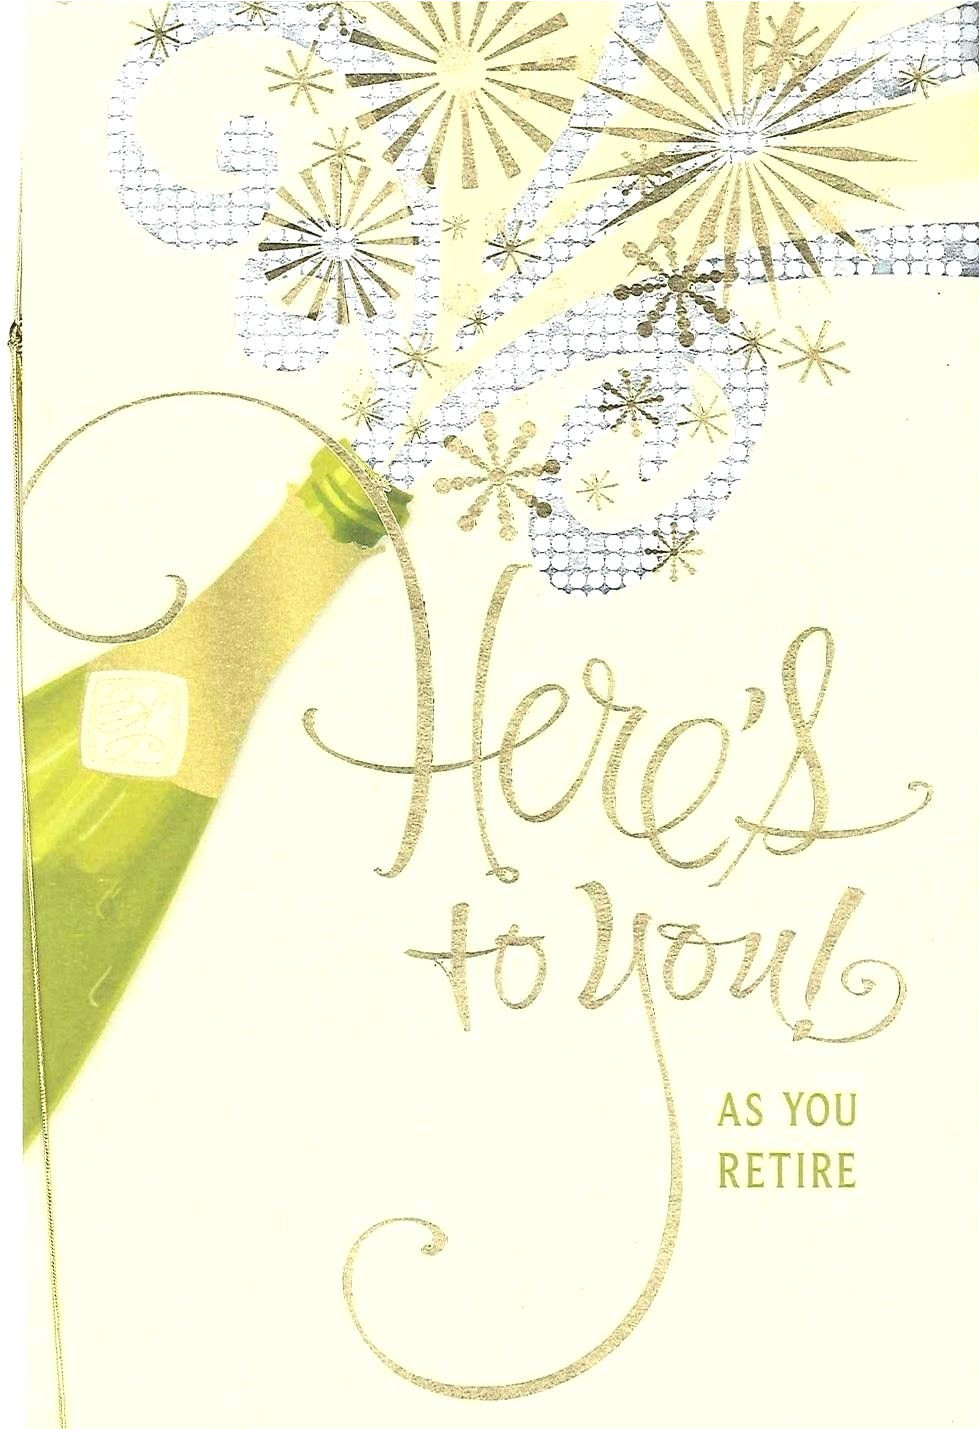 Best Wishes for Farewell Card Congratulations Cards Template In 2020 with Images